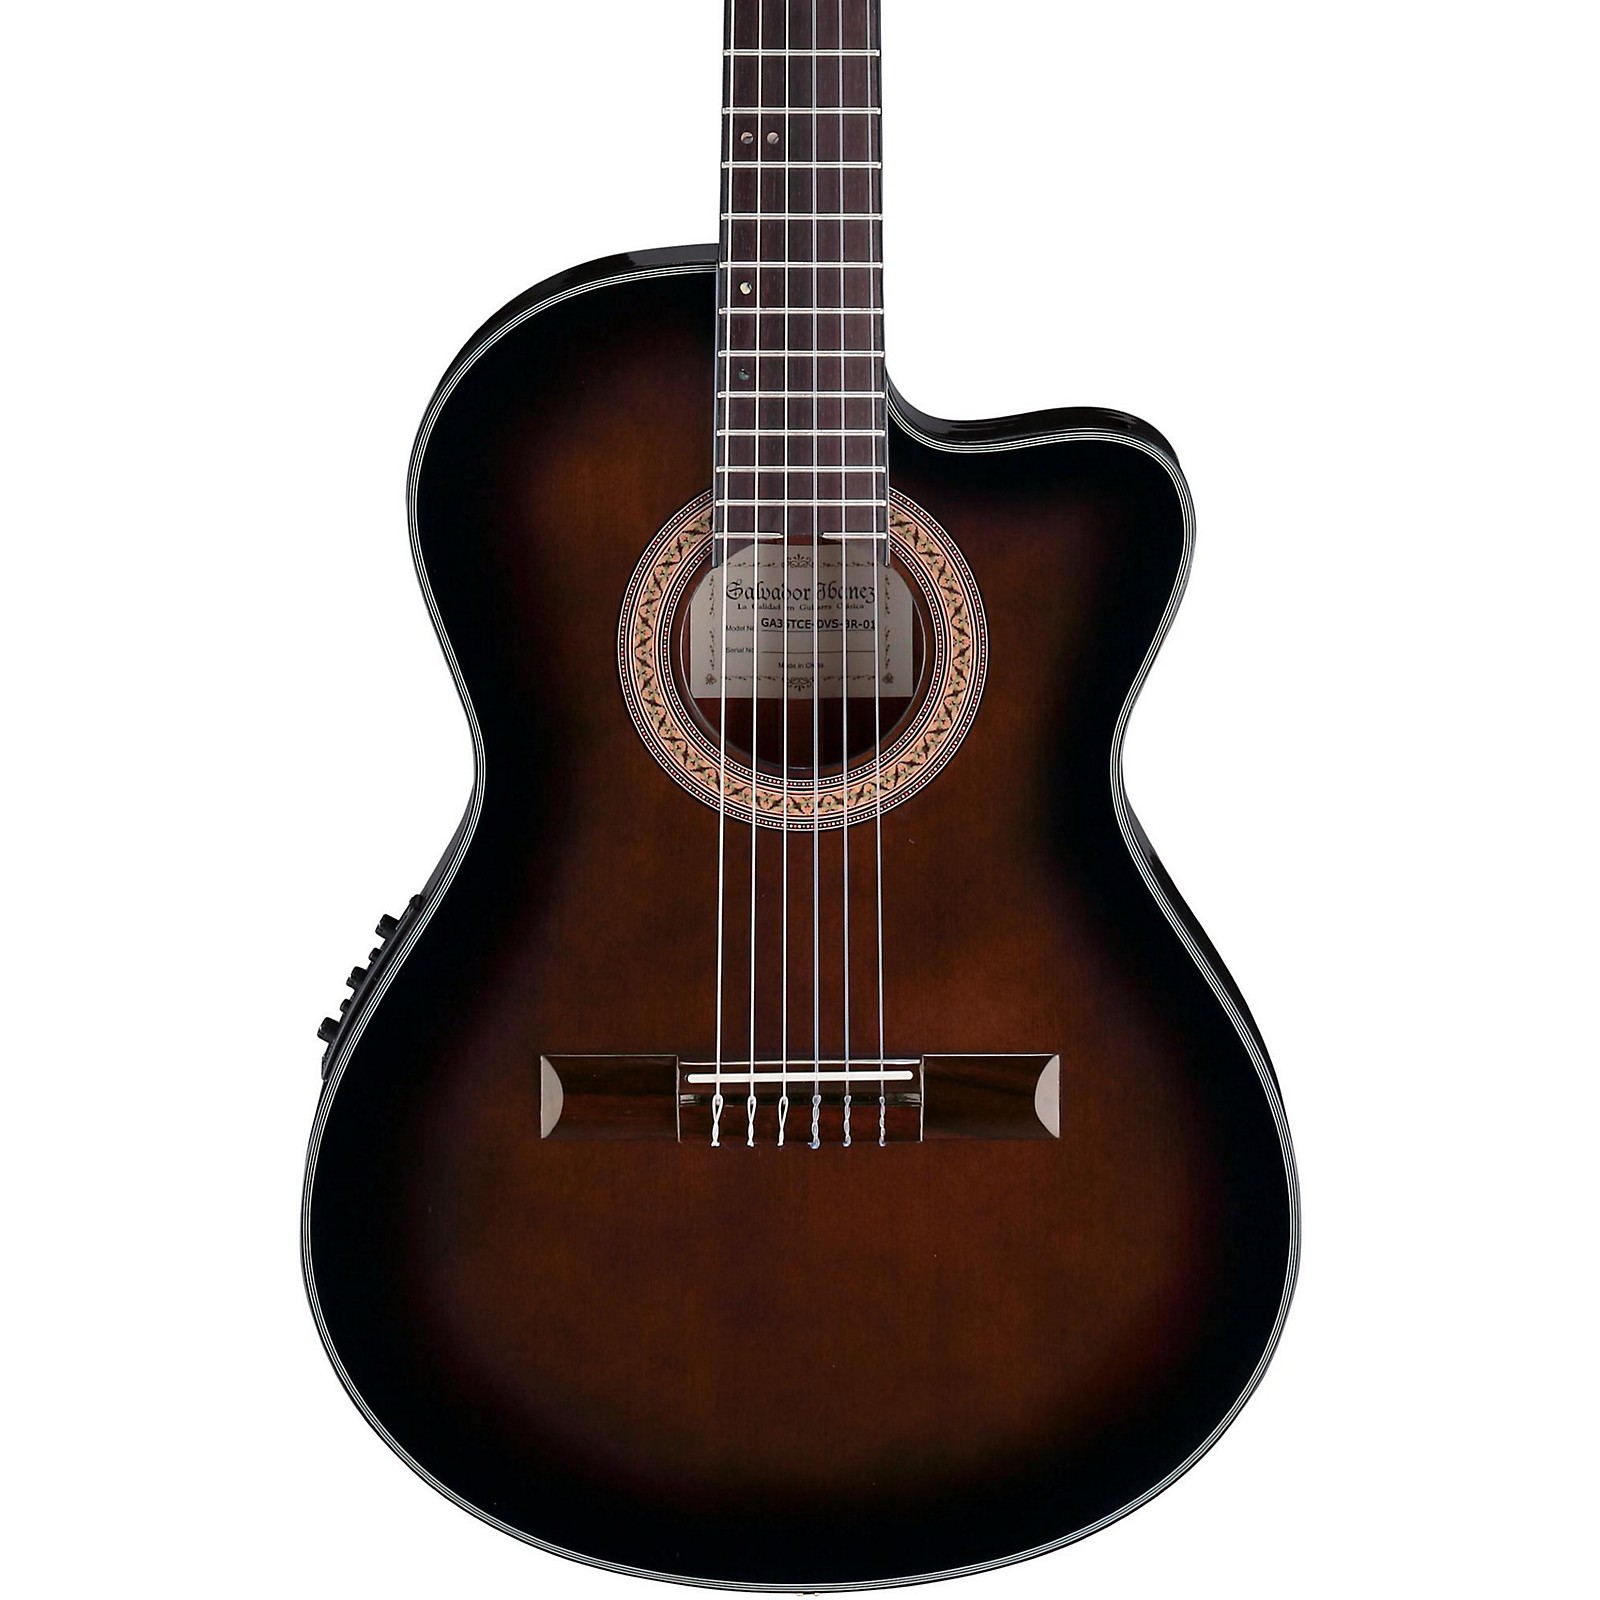 Ibanez GA35 Thinline Acoustic-Electric Classical Guitar